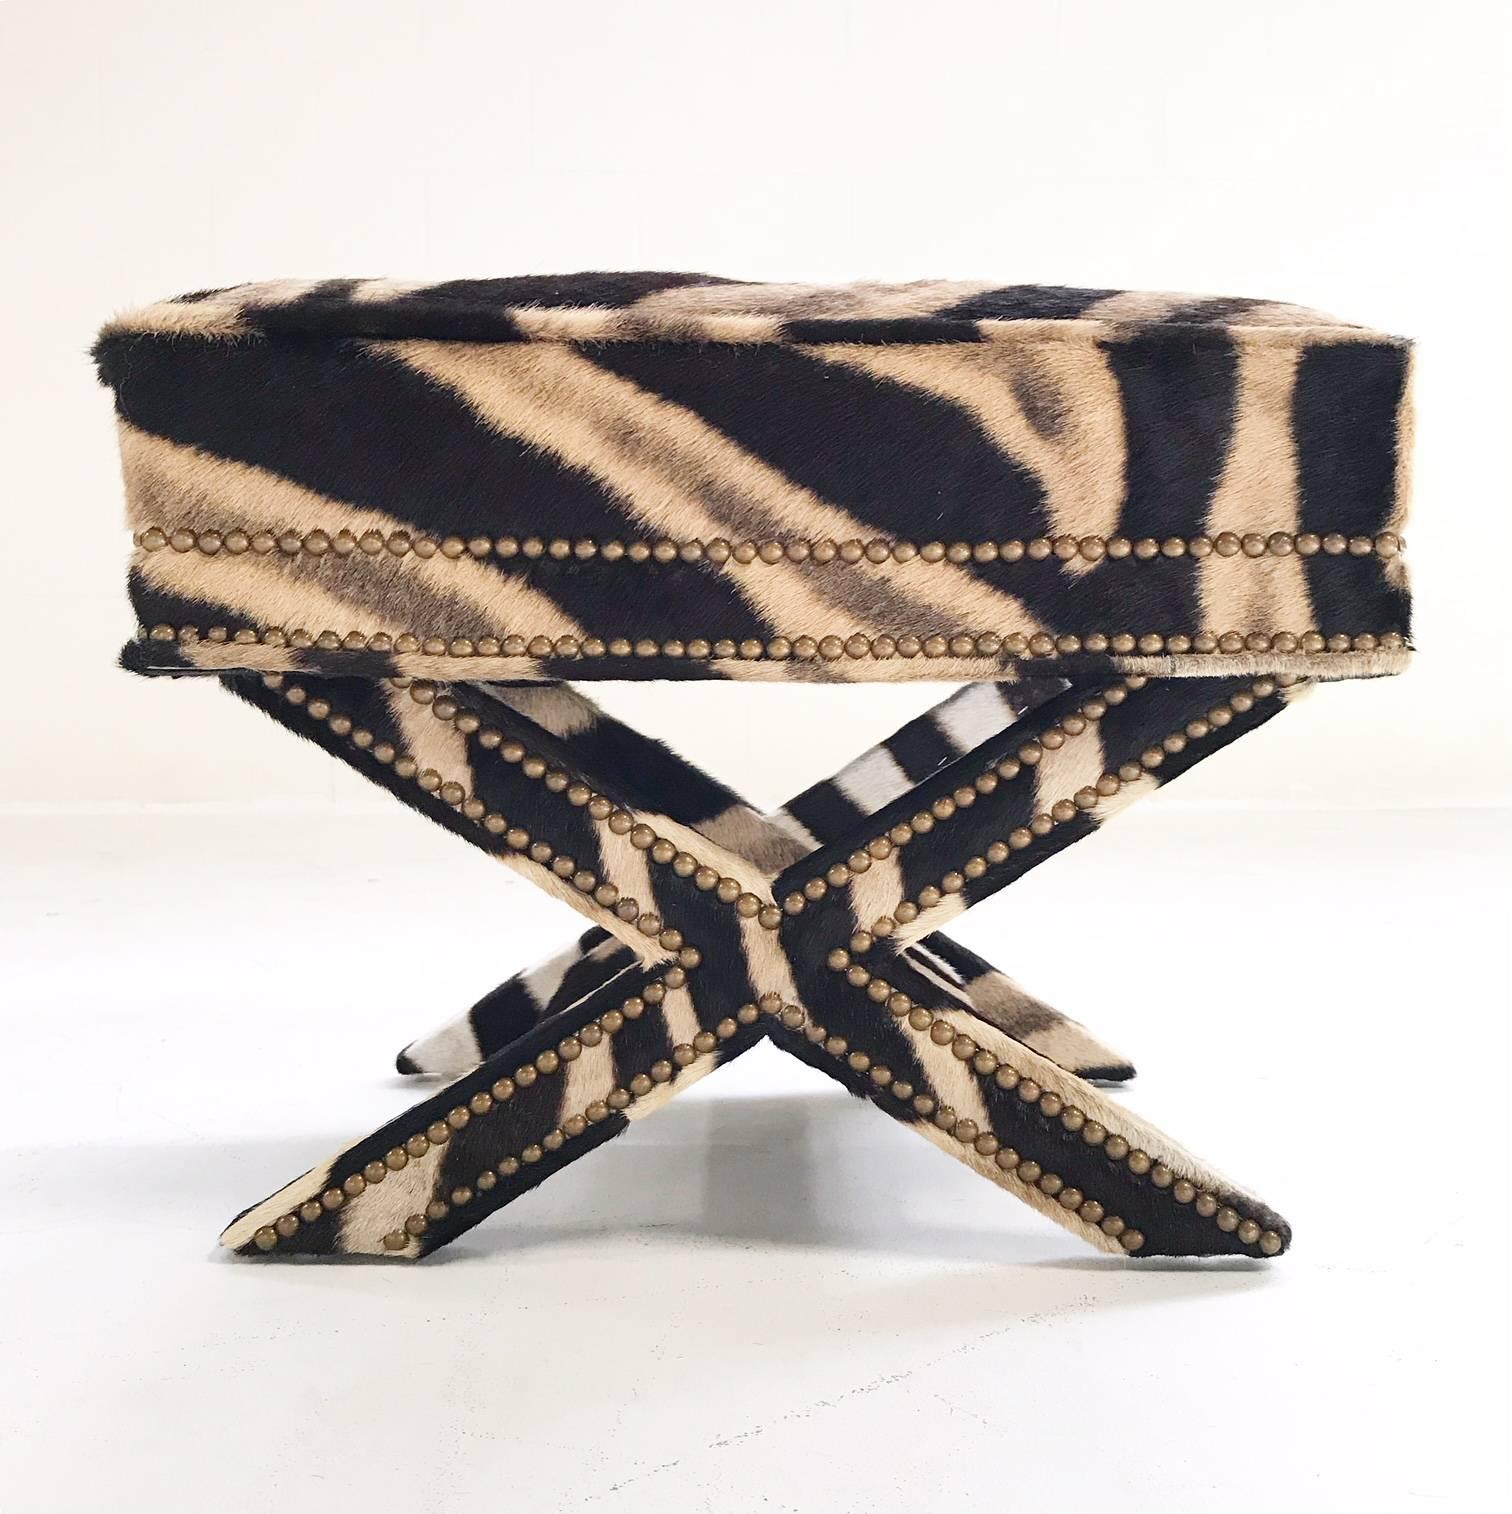 Stunning Billy Baldwin style X bench destined for an amazing room. This is glitter and gold and glamour! The work and craftsmanship to bring this bench back to life is incredible. The luxurious zebra hide is meticulously wrapped around each X shaped